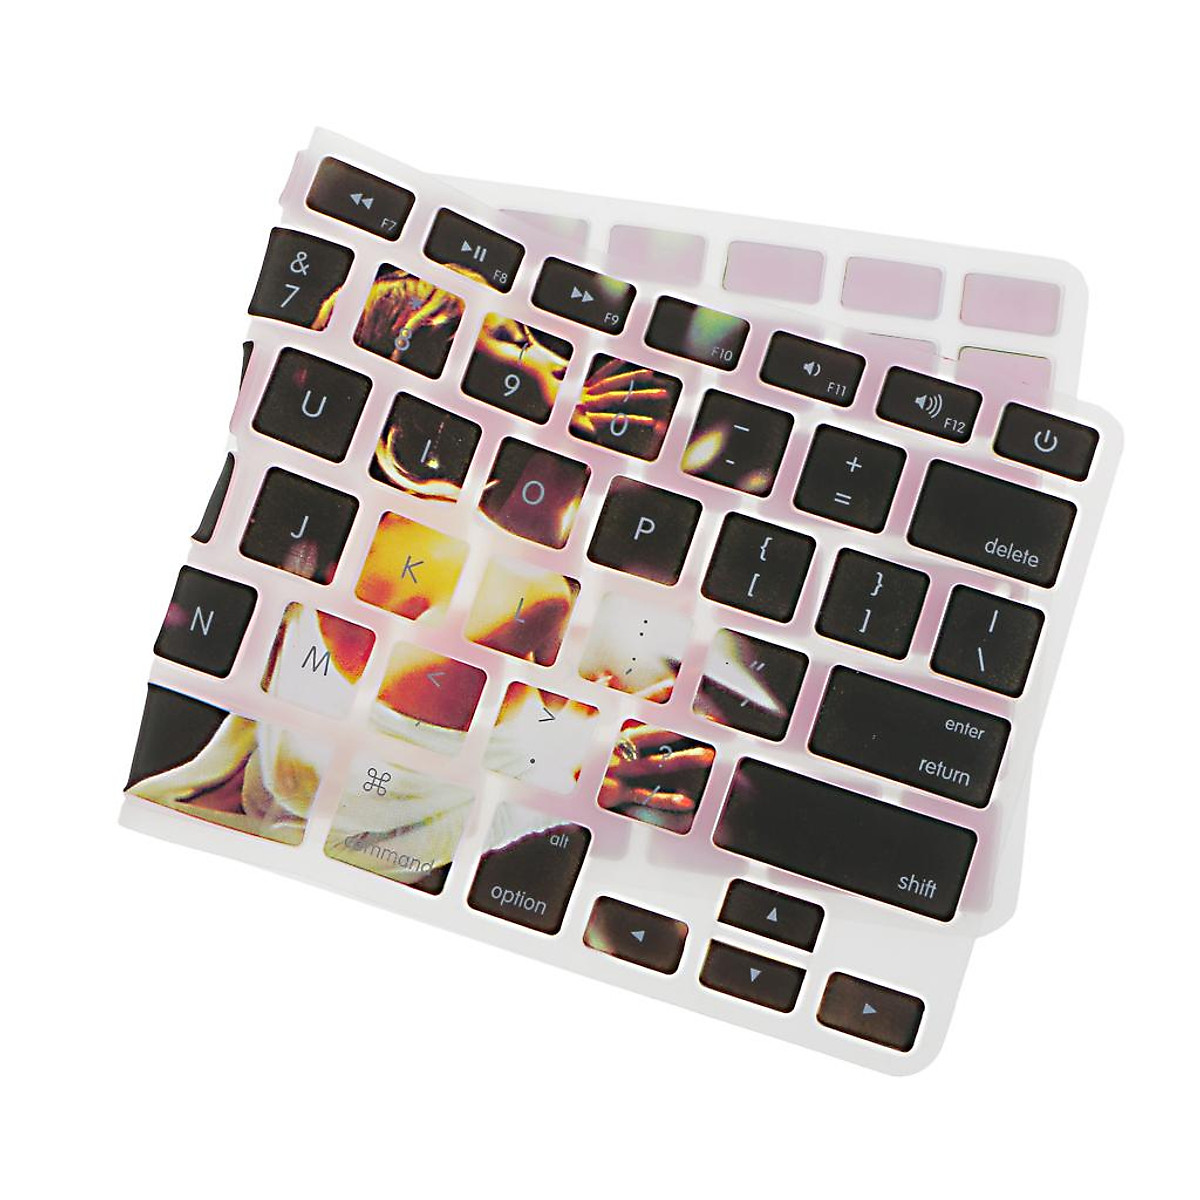 Silicone Soft Decal Keyboard Cover Skin For Laptop Mac Macbook Air/Pro 13 15